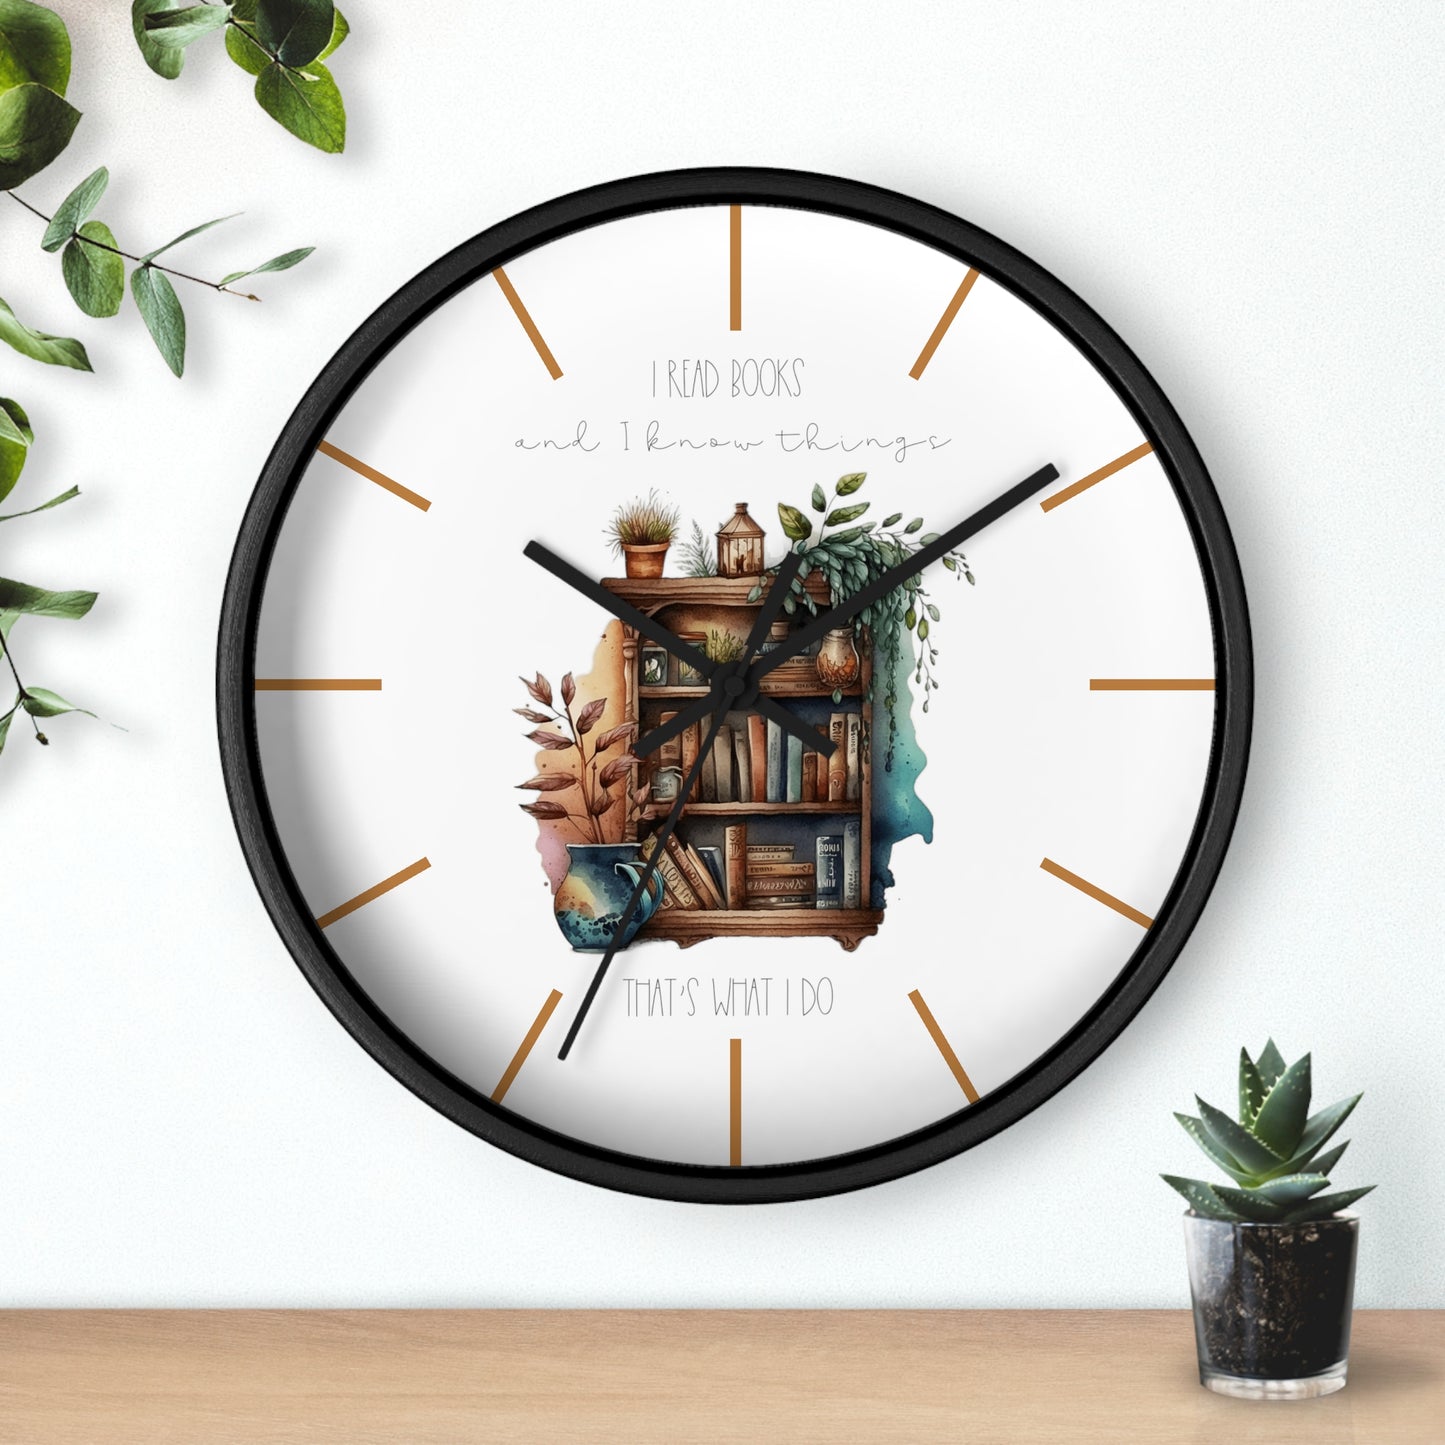 Wall Clock ”I read books and I know things. That’s what I do.”